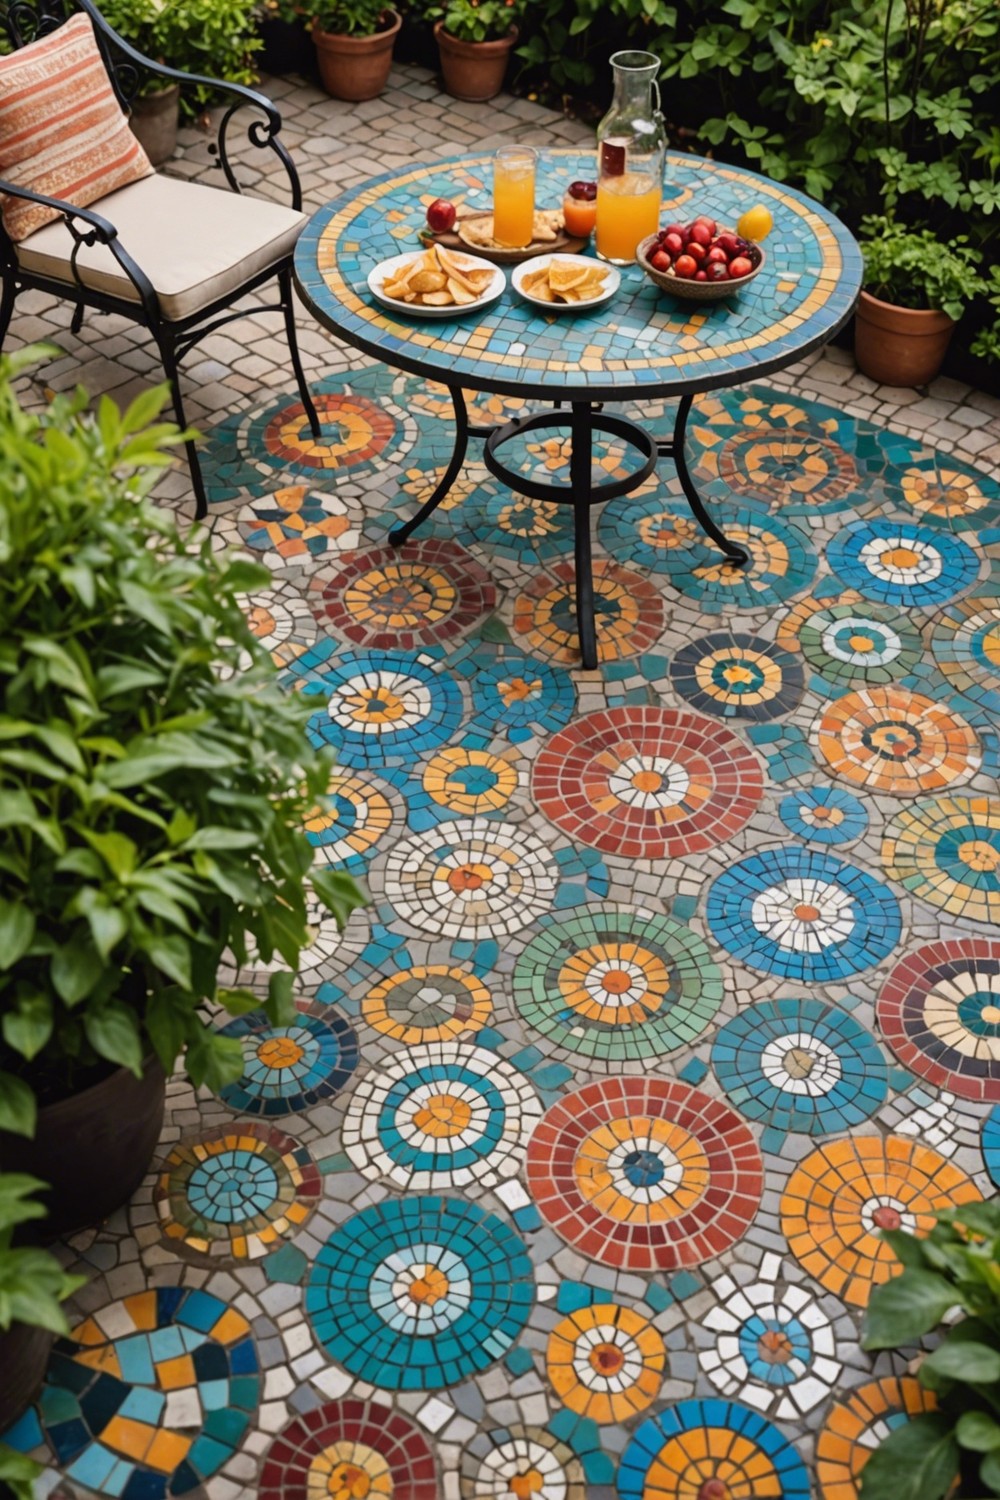 Mosaic Stone Flooring for a Colorful Patio